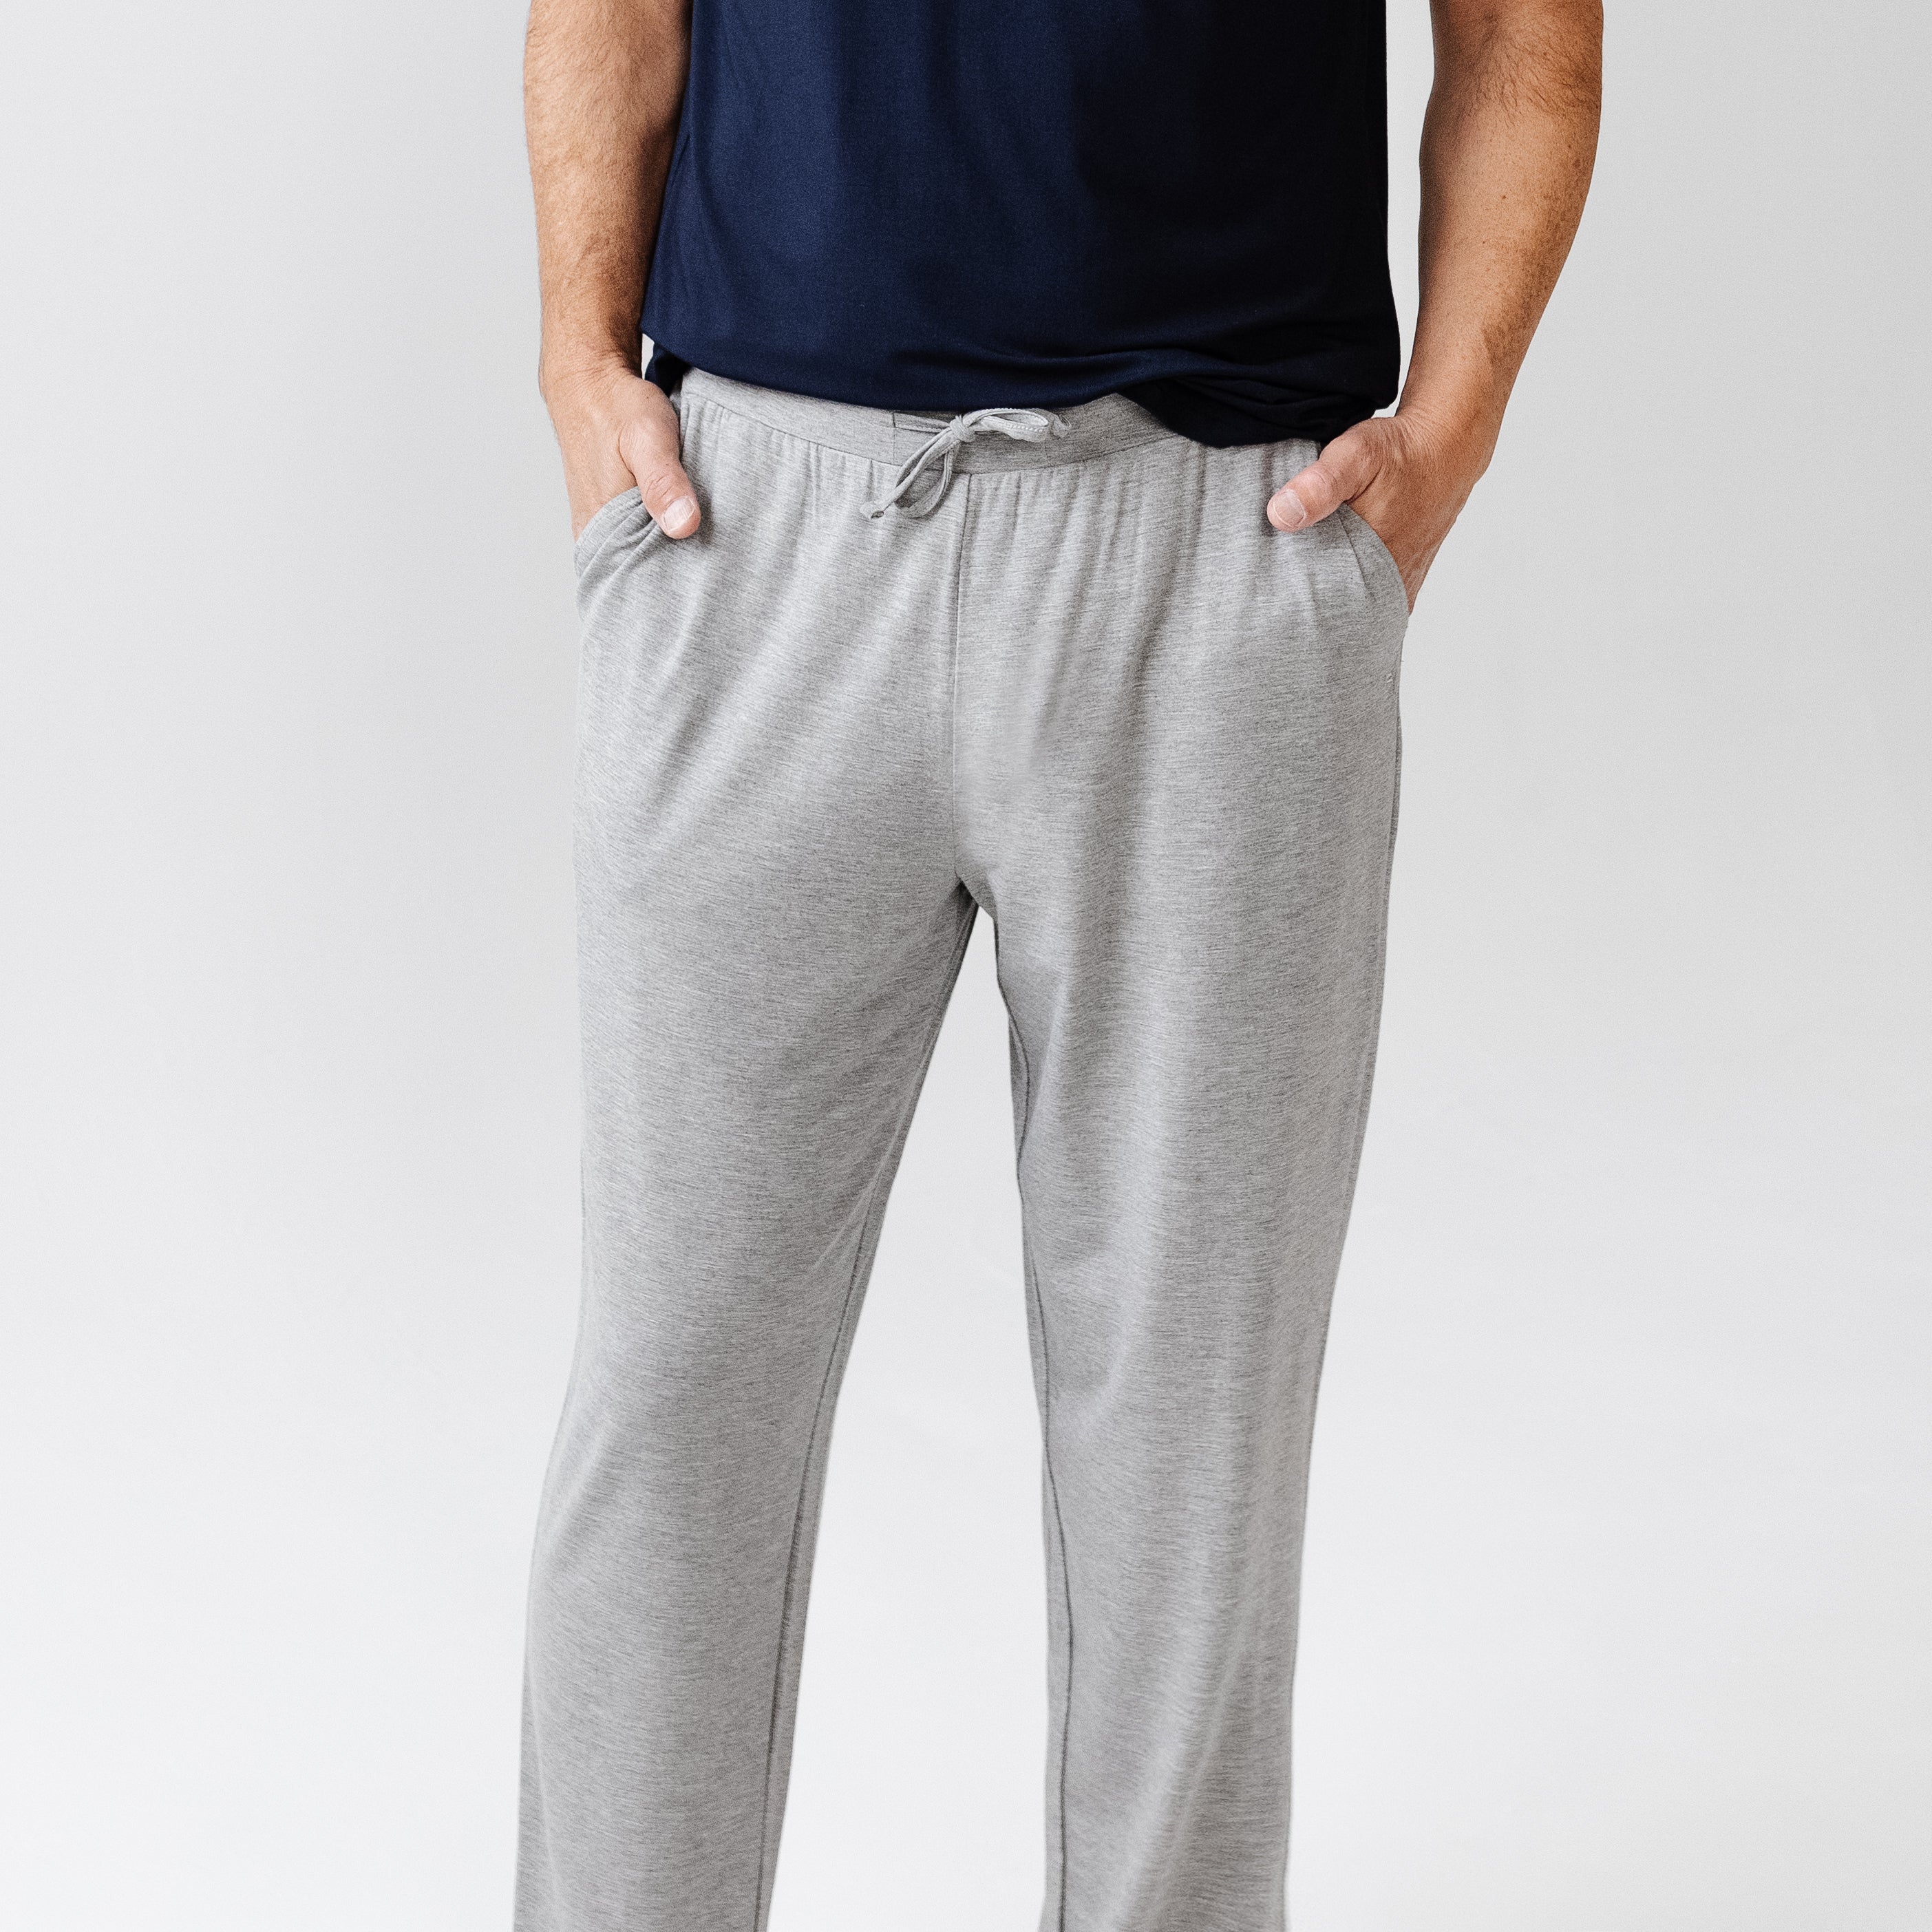 Heather Grey Men's Bamboo Stretch-Knit Pajama Pant [Lincoln]